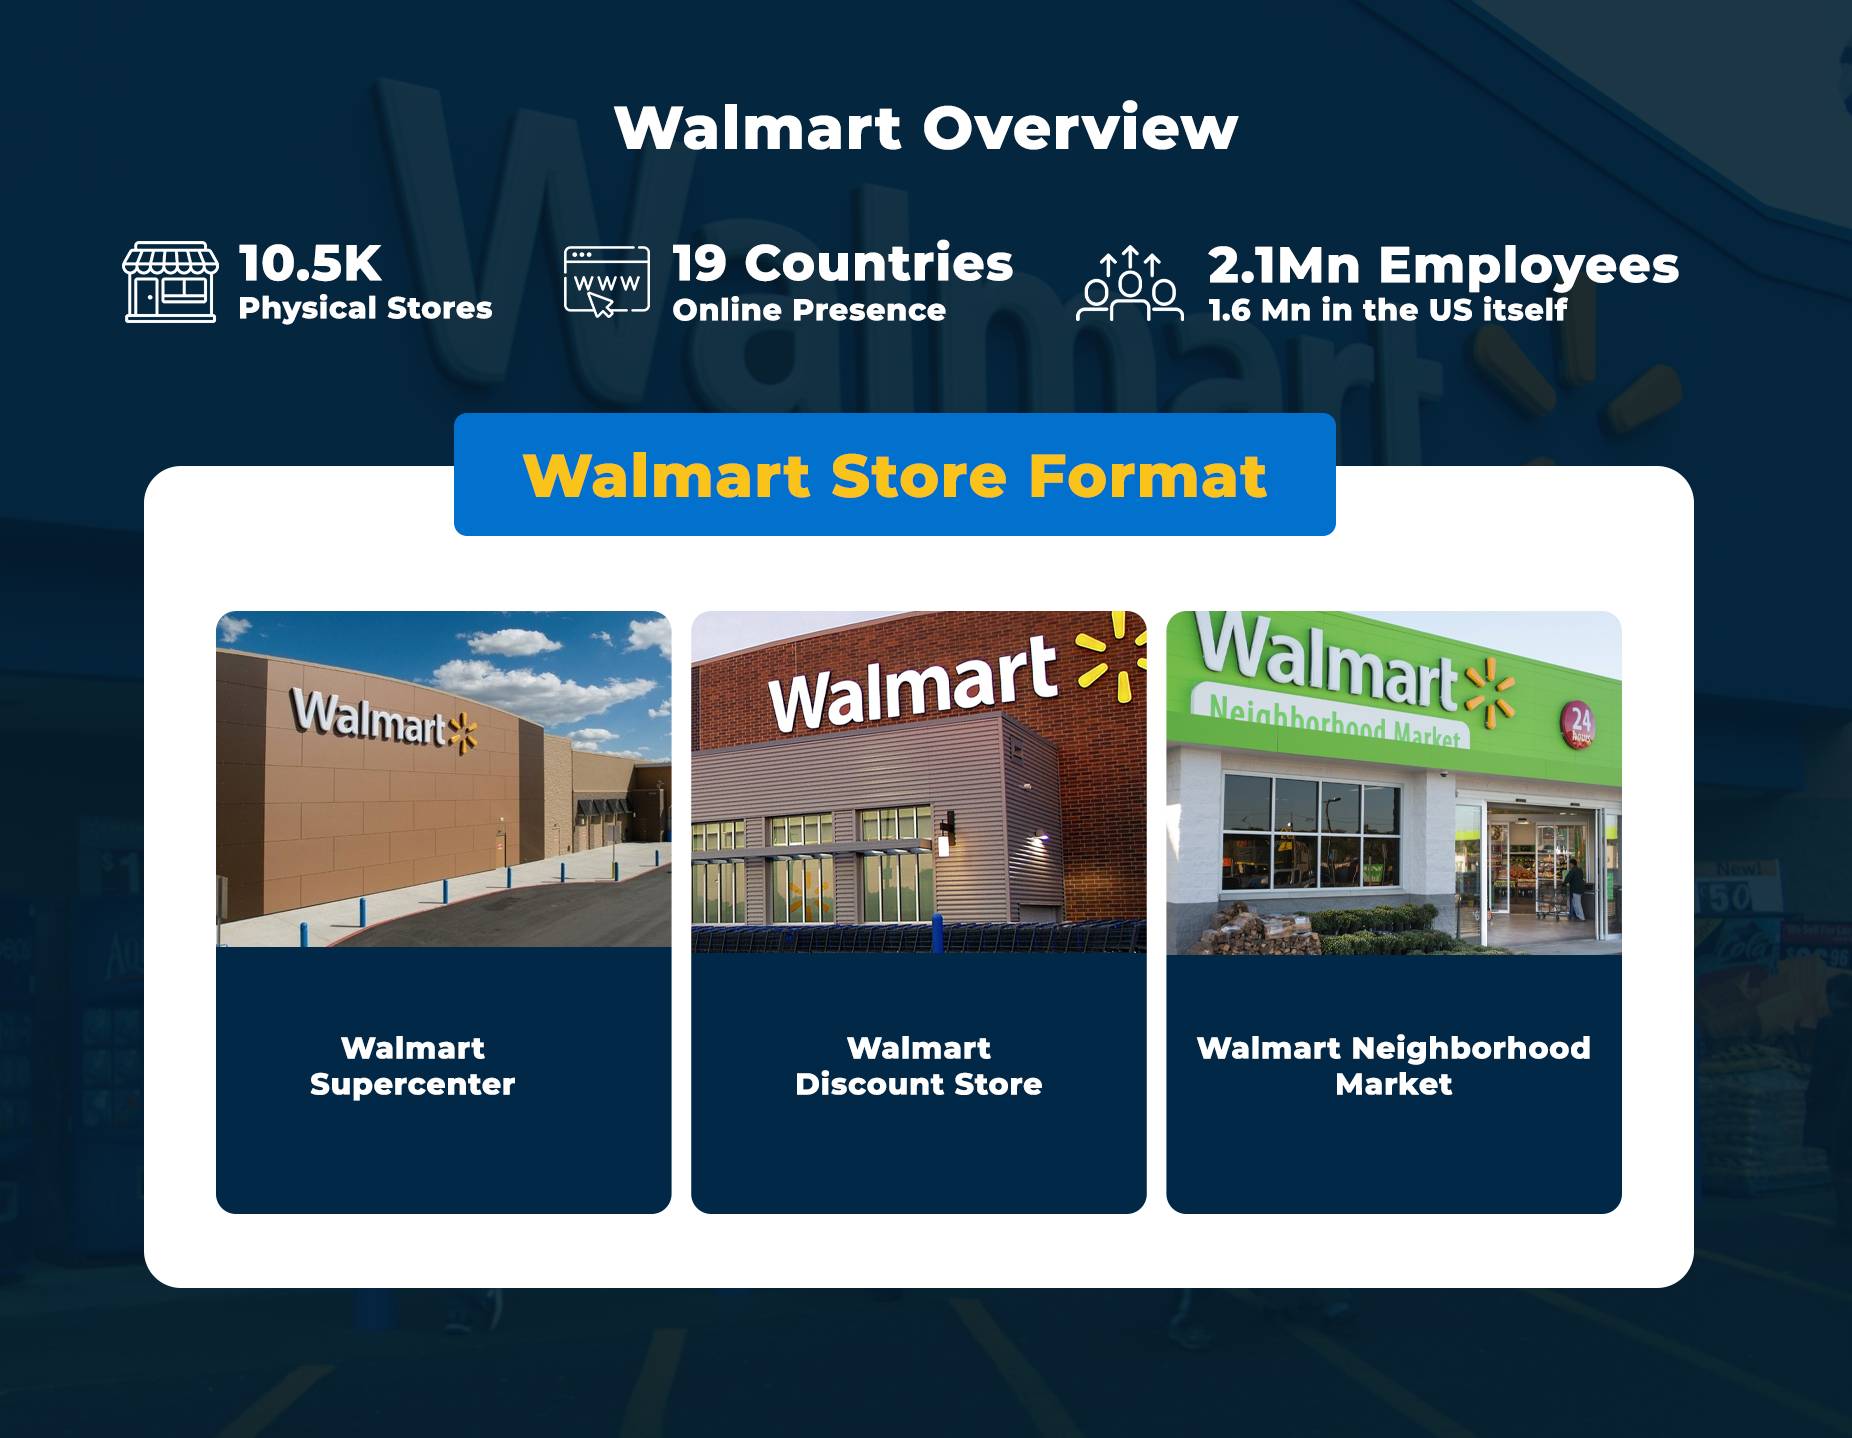 Overview of Walmart Supply Chain Operations